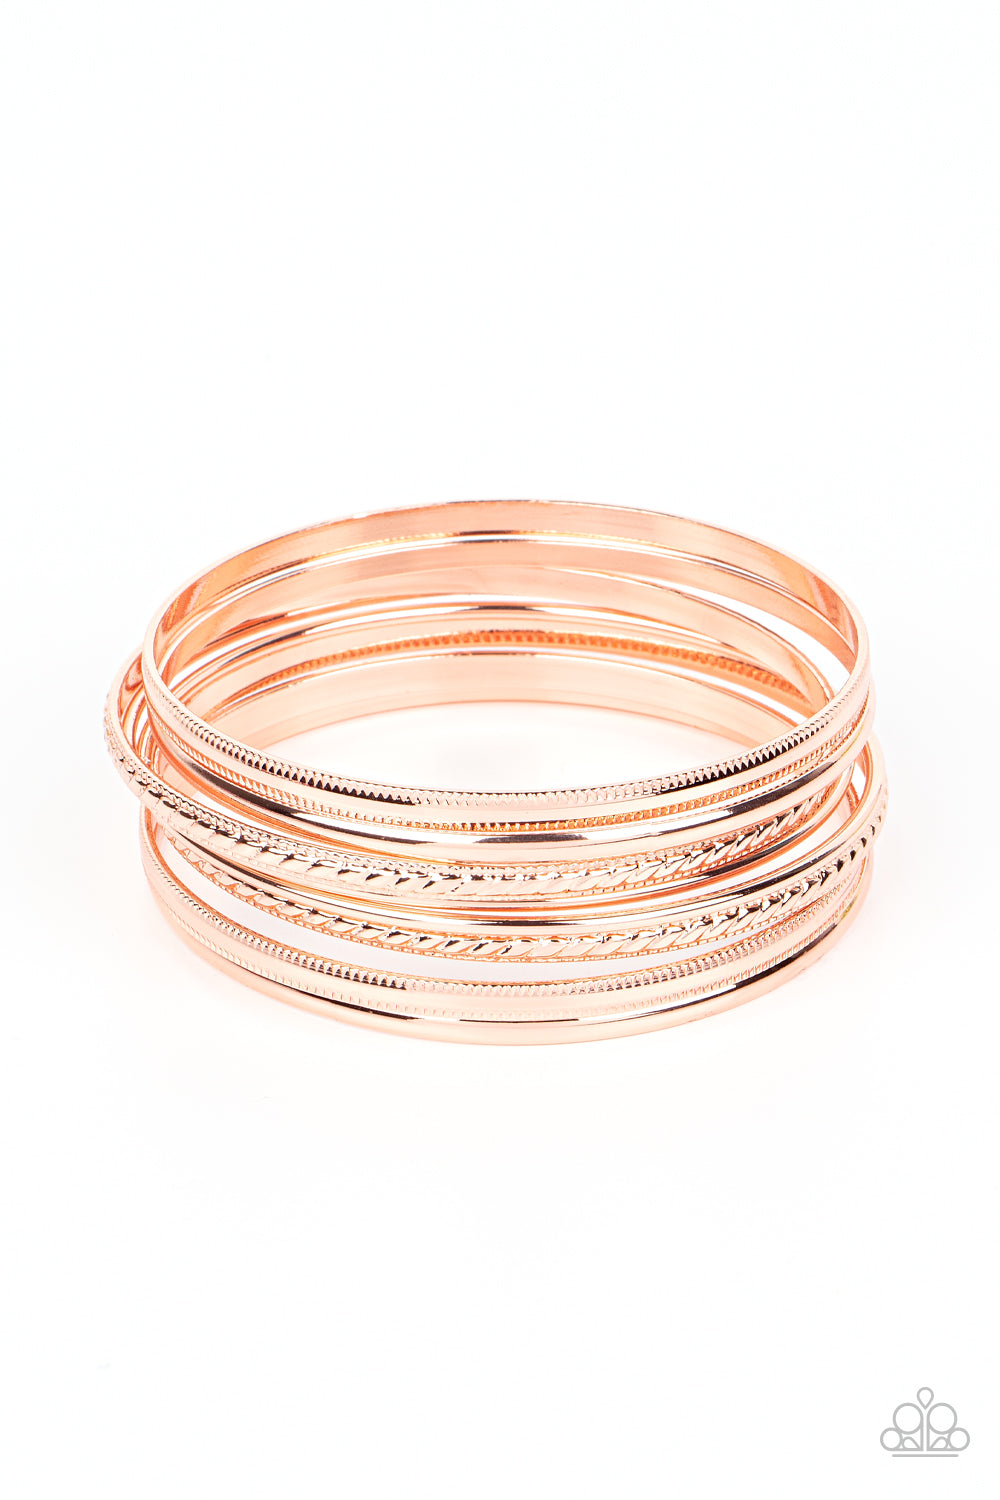 Stackable Shimmer - Copper-Paparazzi